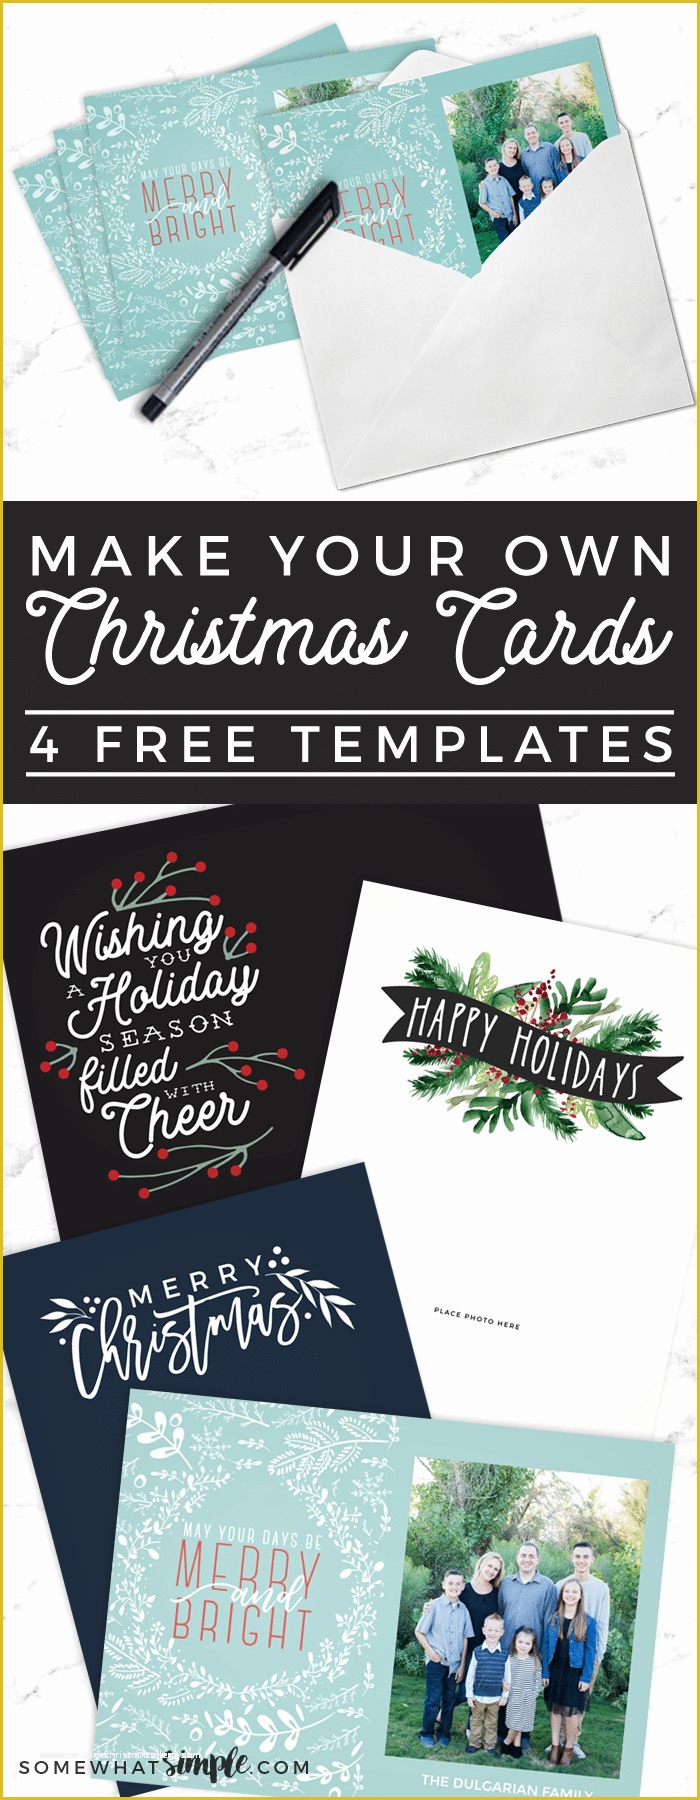 Photo Card Template Free Of Make Your Own Christmas Cards for Free somewhat